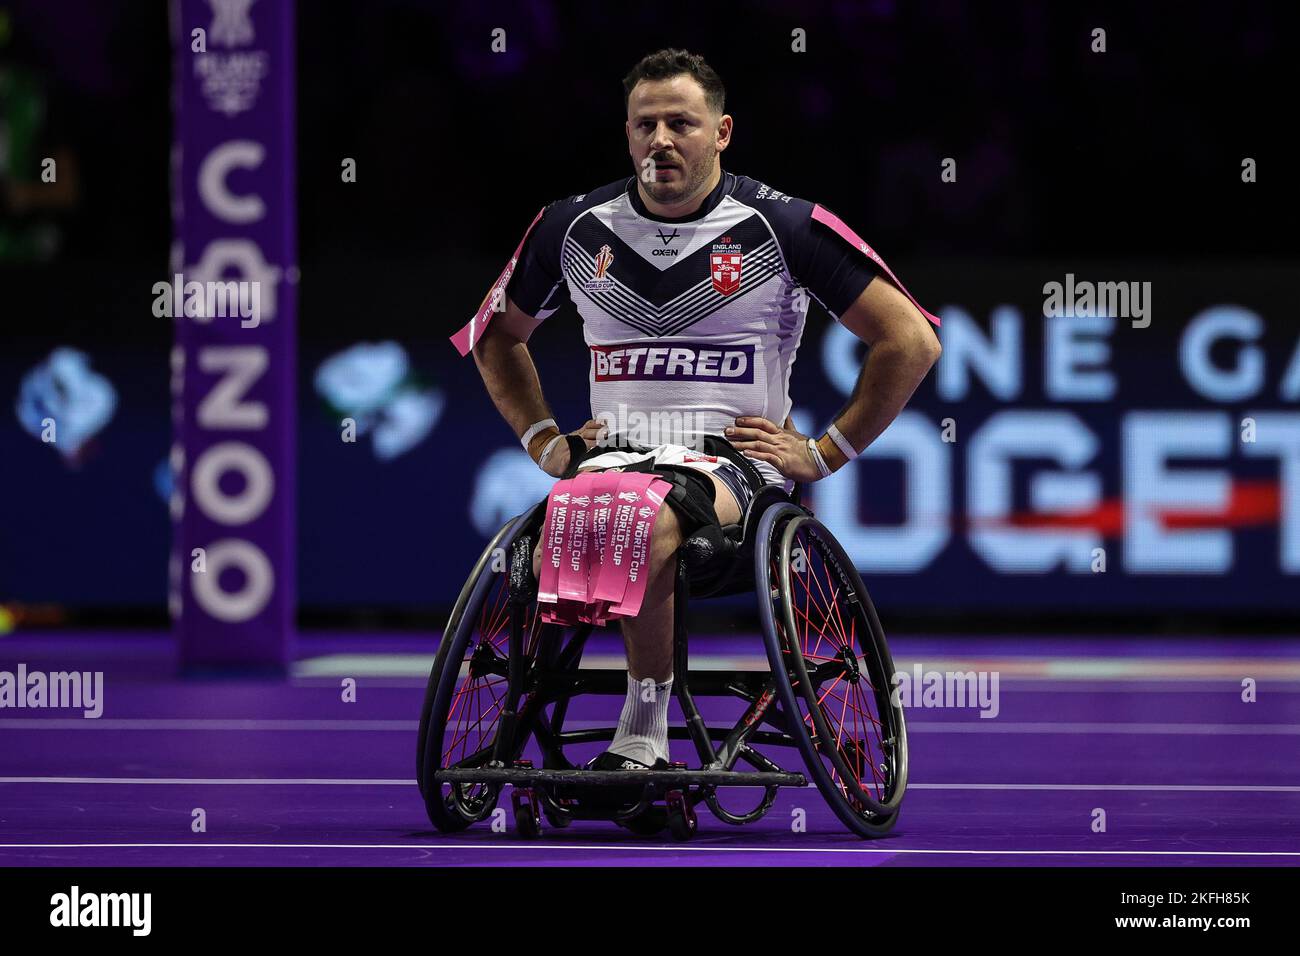 Manchester, UK. 18th Nov, 2022. Sebastien Bechara of England during the Wheelchair Rugby League World Cup 2021 Final France vs England at Manchester Central, Manchester, United Kingdom, 18th November 2022 (Photo by Mark Cosgrove/News Images) in Manchester, United Kingdom on 11/18/2022. (Photo by Mark Cosgrove/News Images/Sipa USA) Credit: Sipa USA/Alamy Live News Stock Photo